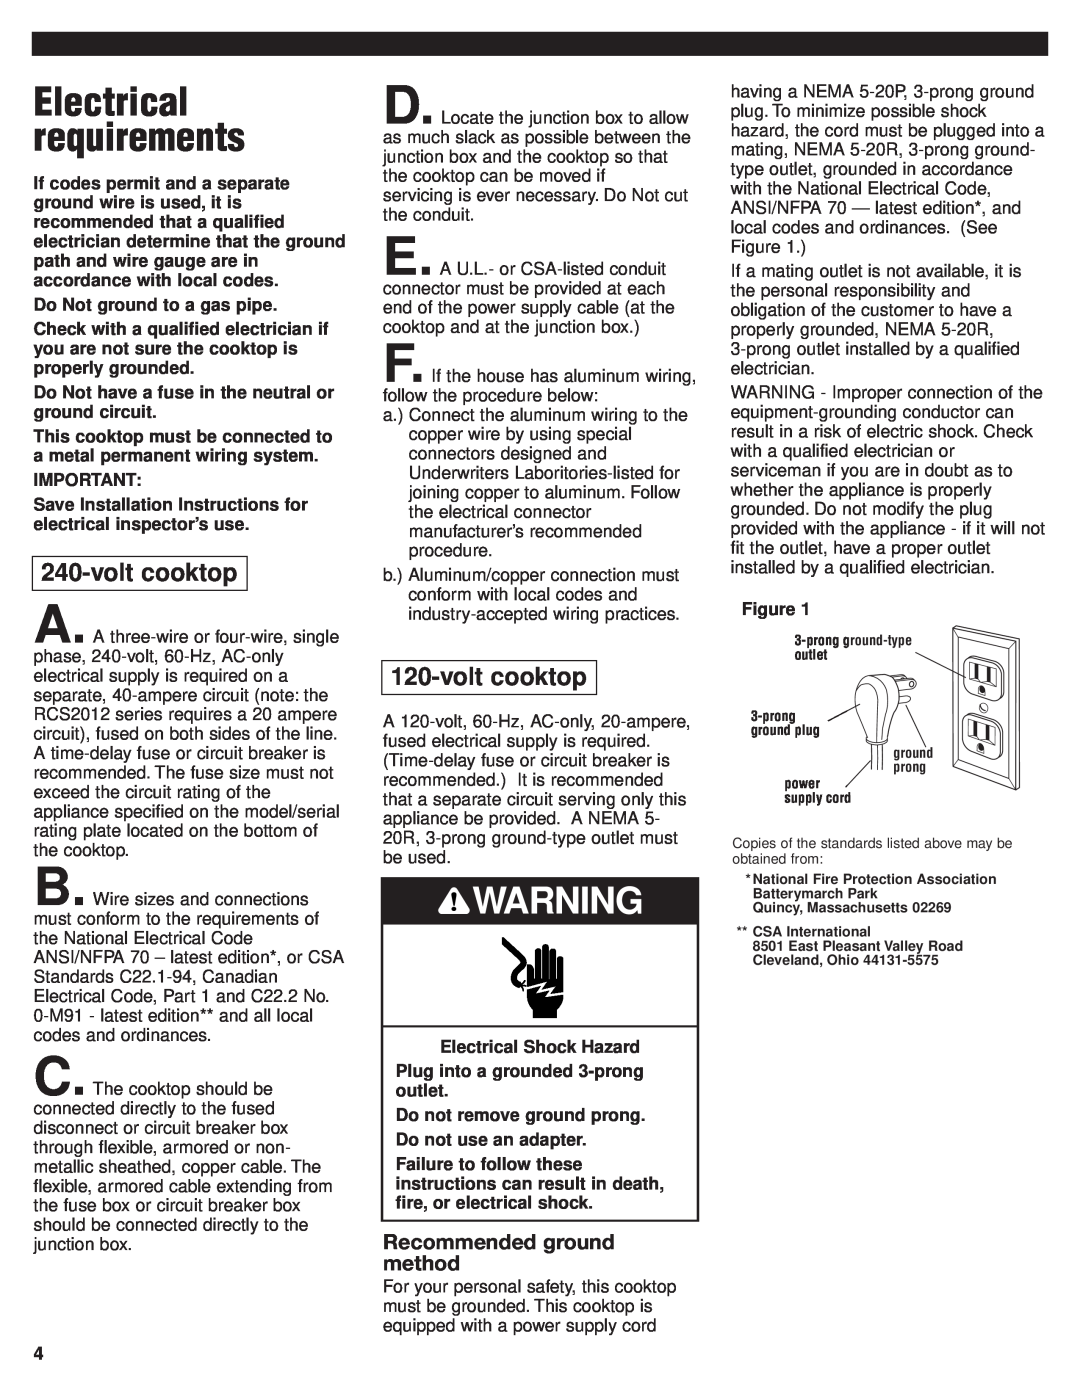 Whirlpool RCS2002GS1 installation instructions Electrical requirements, volt cooktop, Recommended ground method 